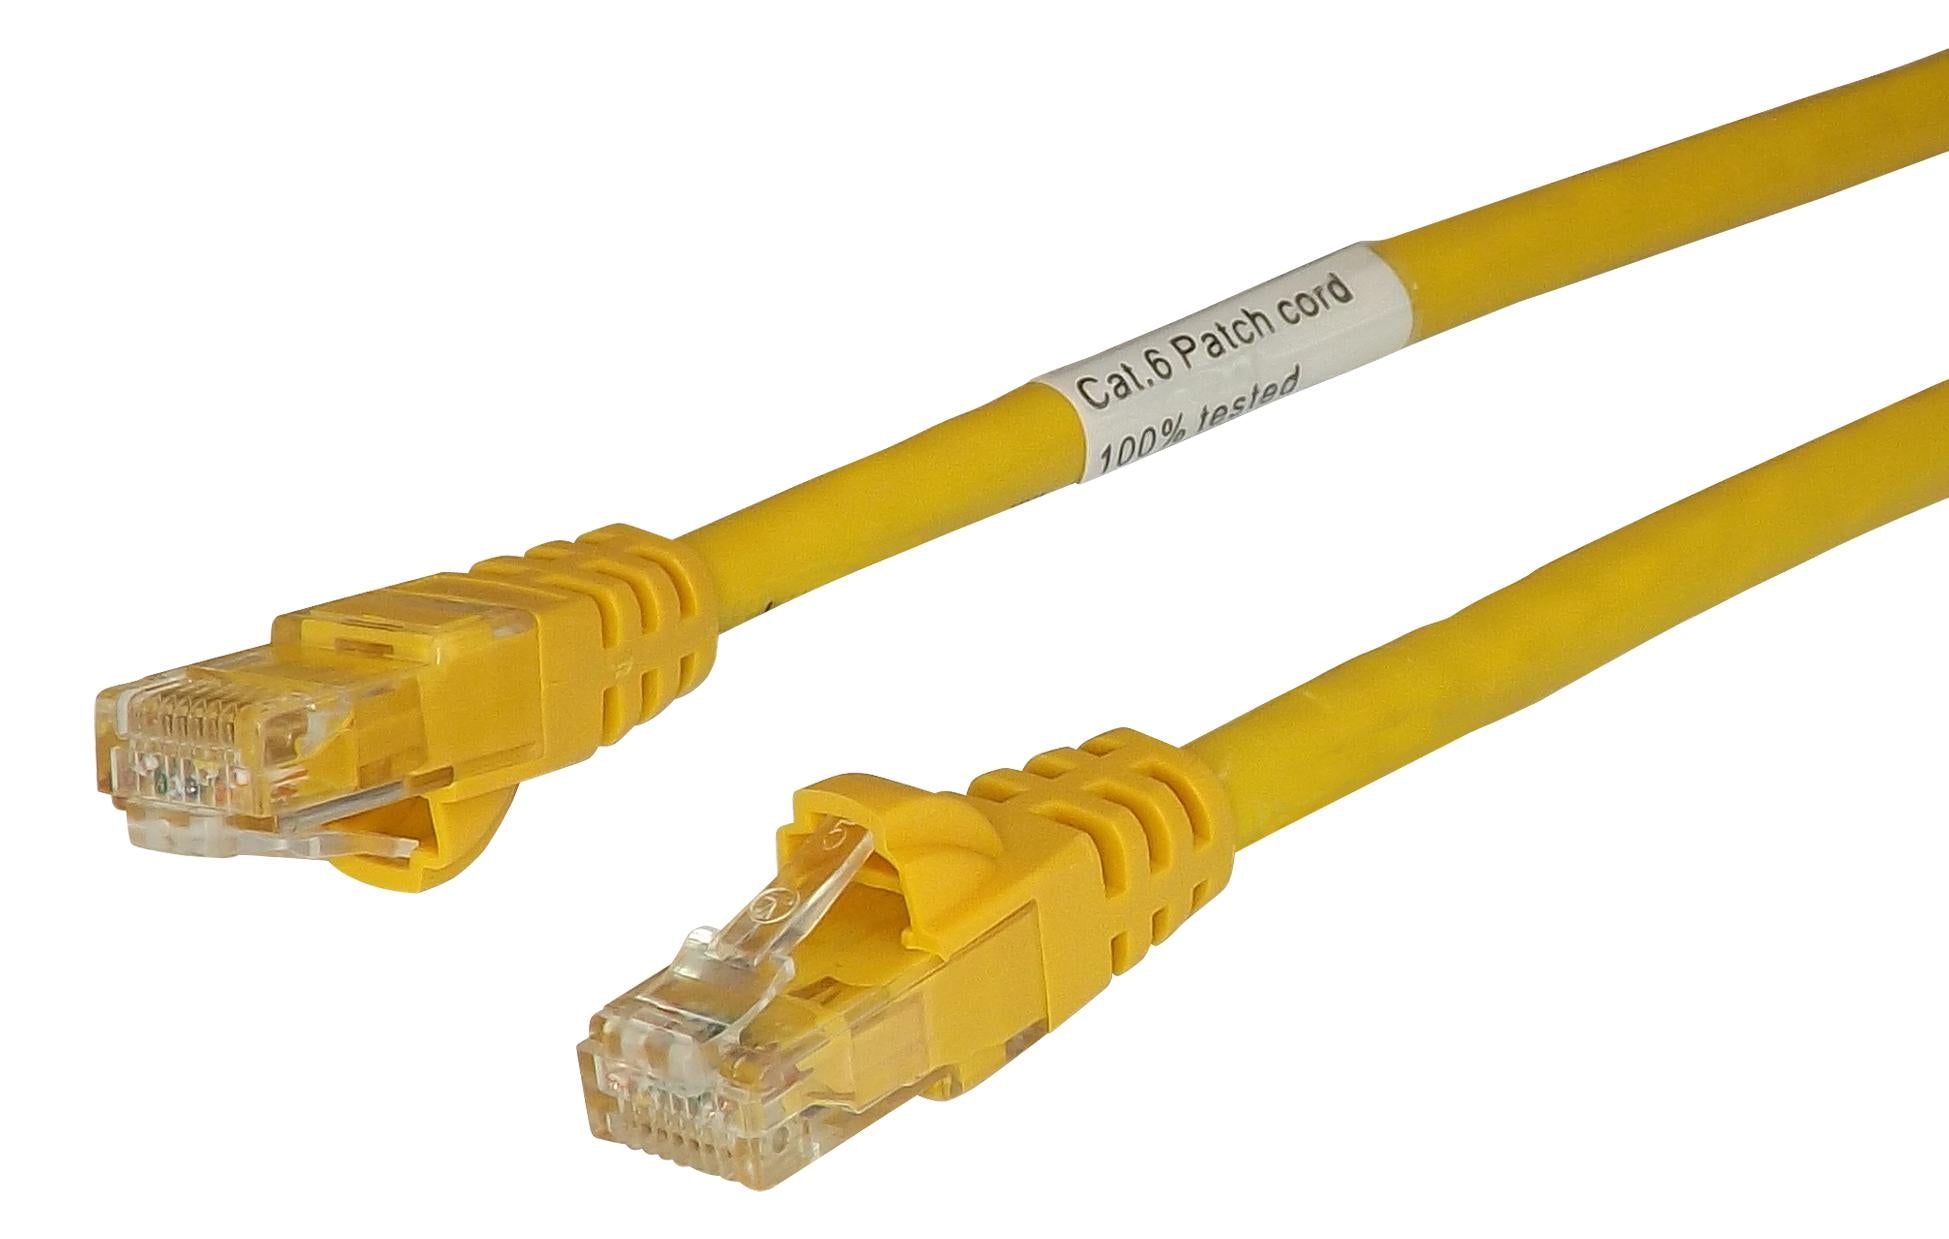 SP5YW PATCH CABLE, RJ45, CAT6, 5M, YELLOW TUK